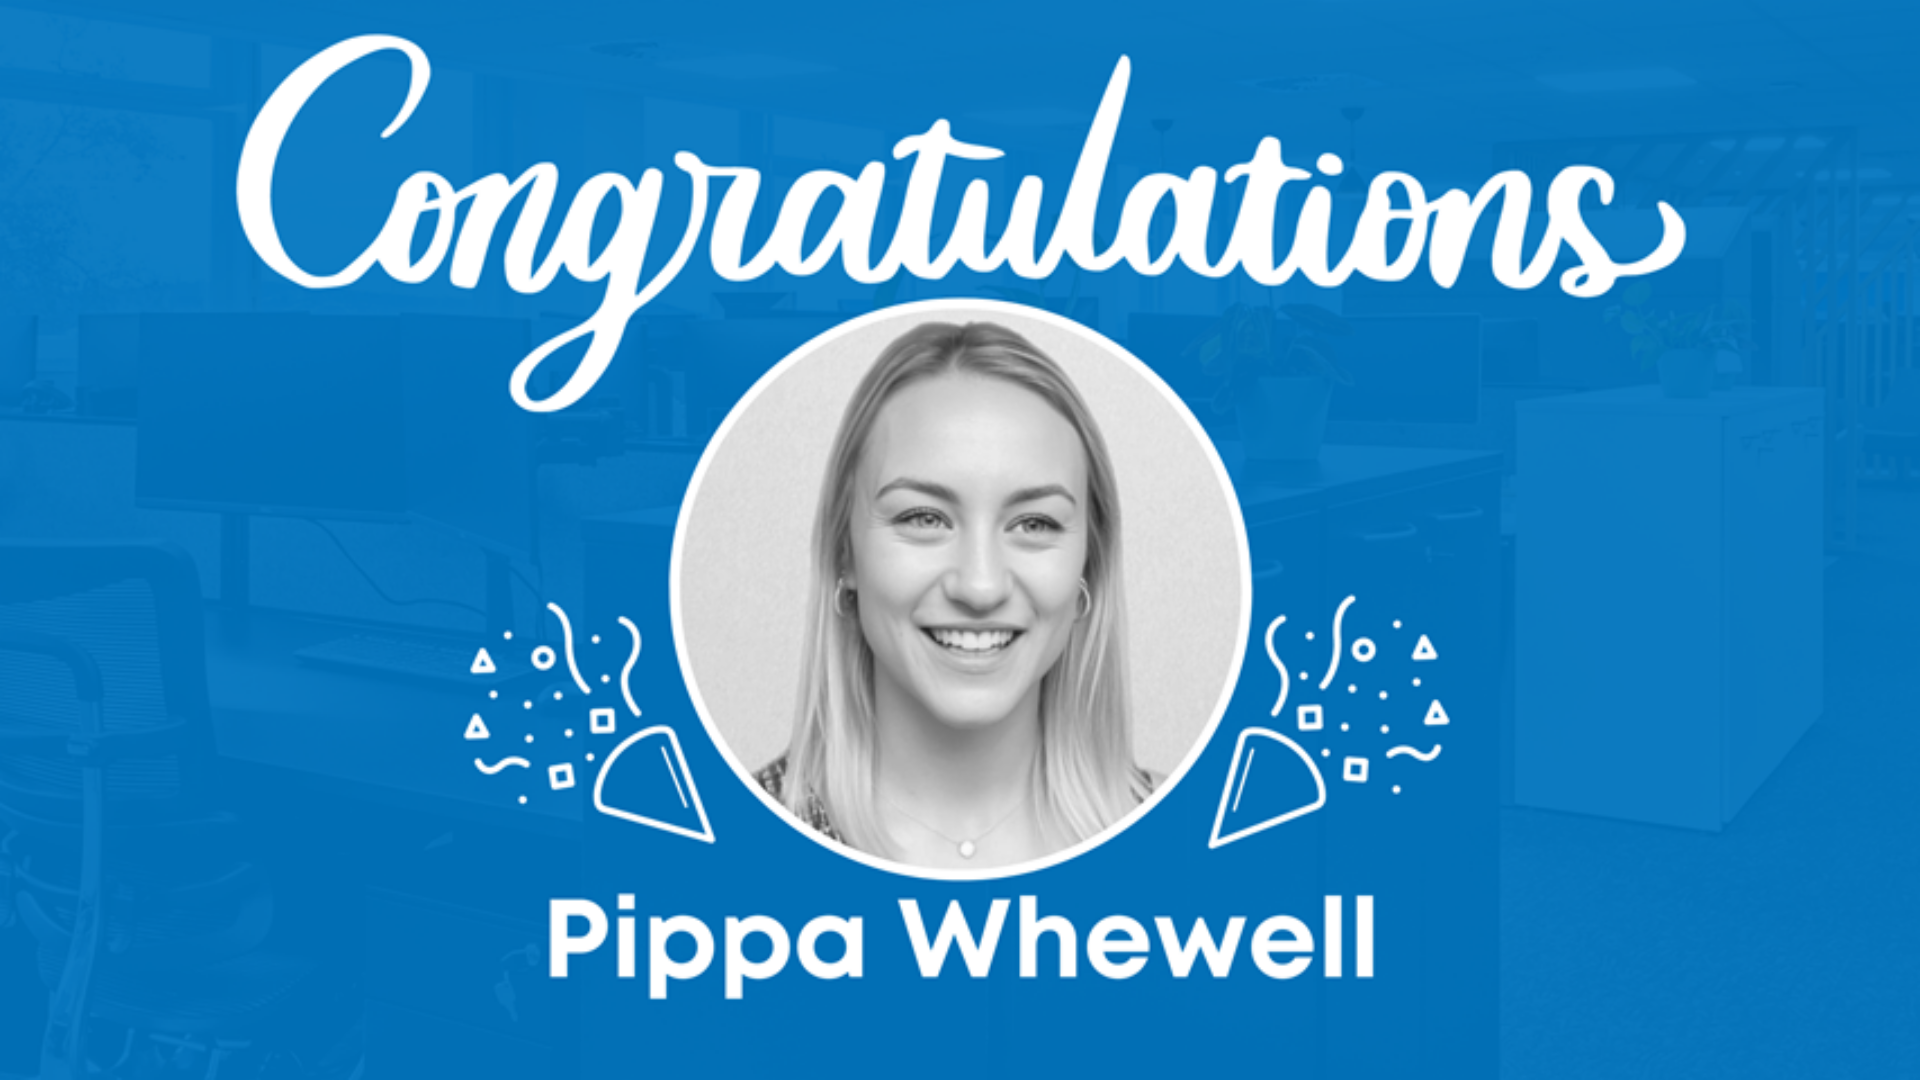 Congratulations to Pippa Whewell